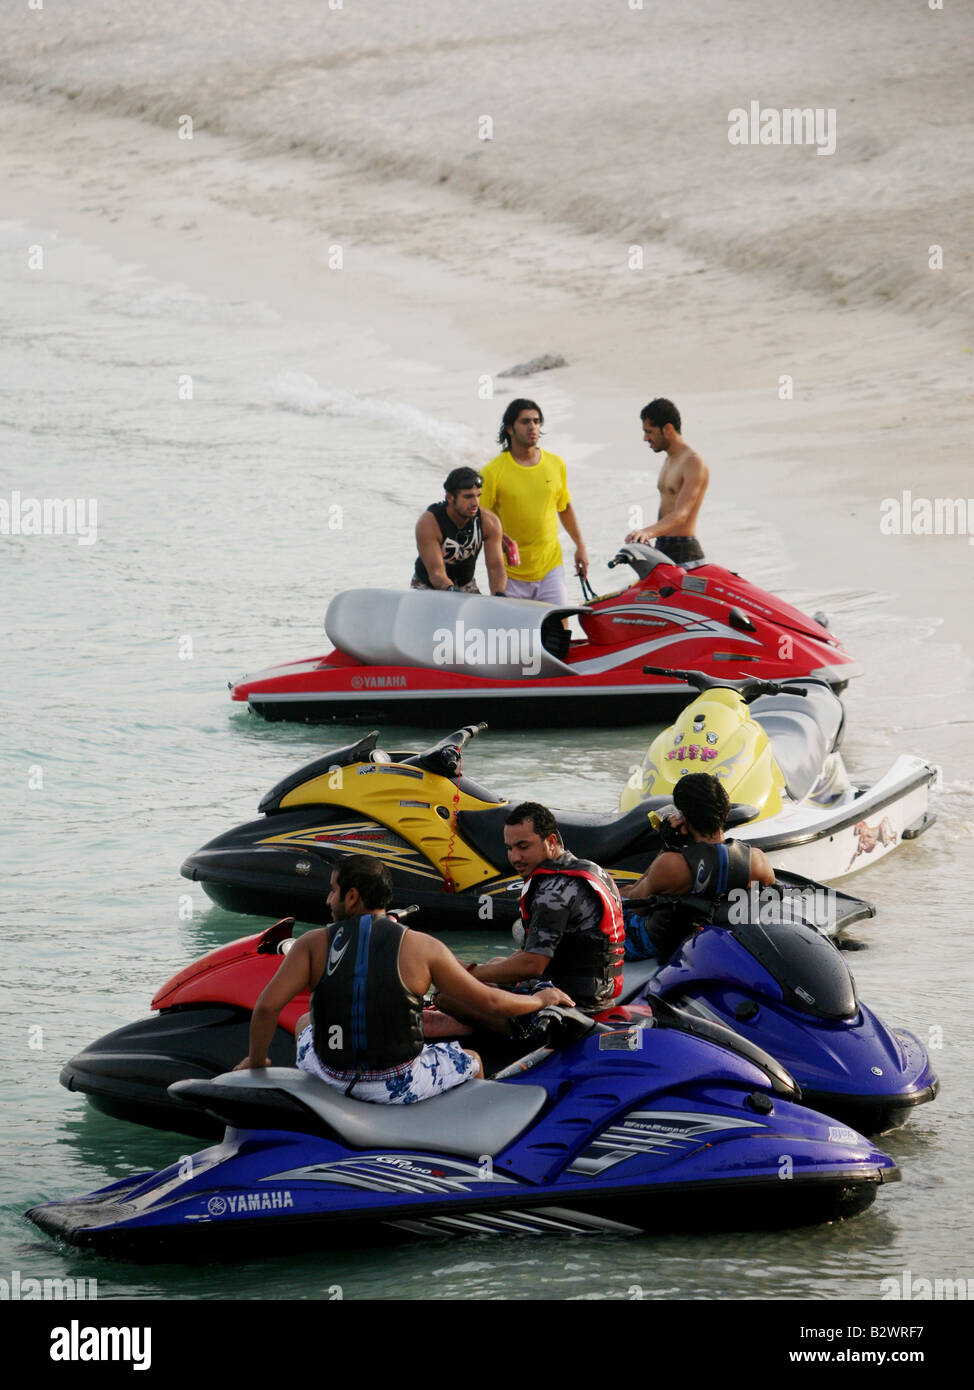 Jet skiers rest and chat on their jet skis along the corniche in Abu Dhabi Stock Photo